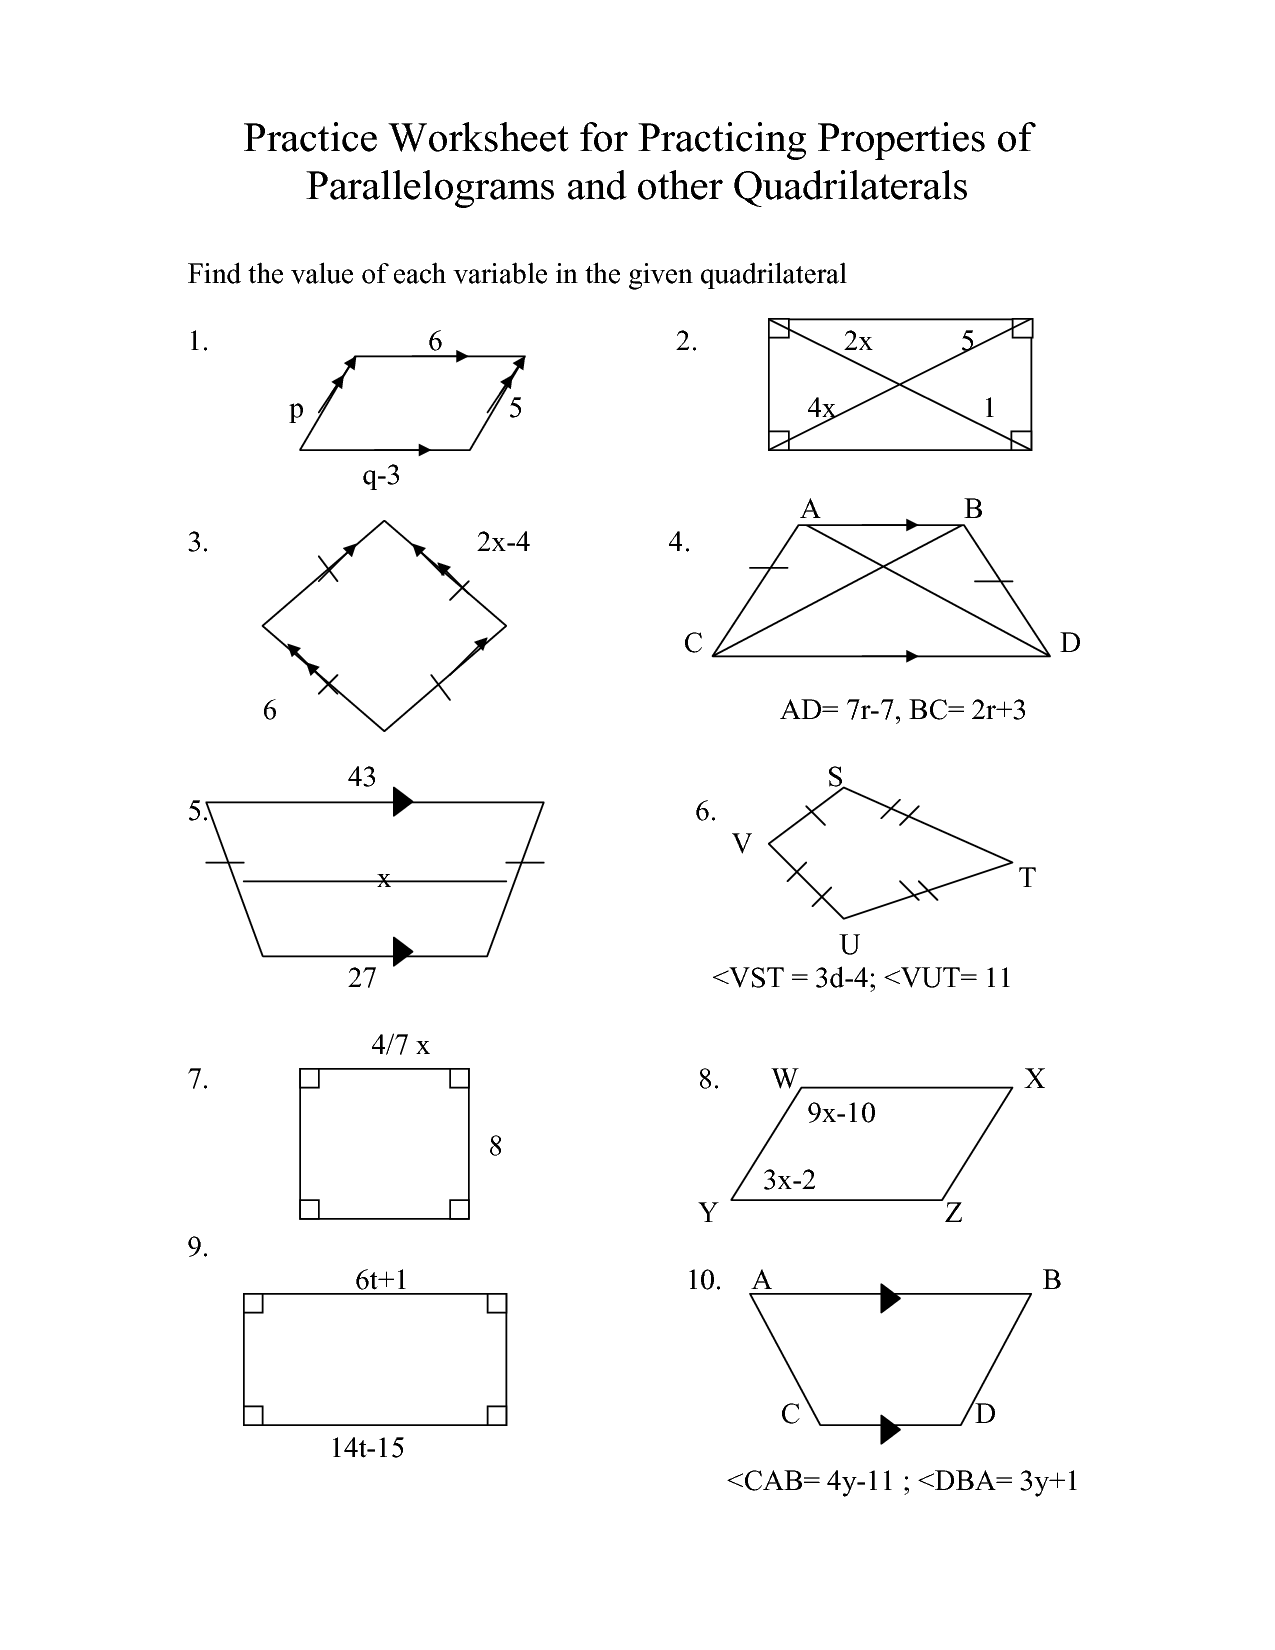 Quadrilaterals Properties Of Parallelograms Worksheet Answers